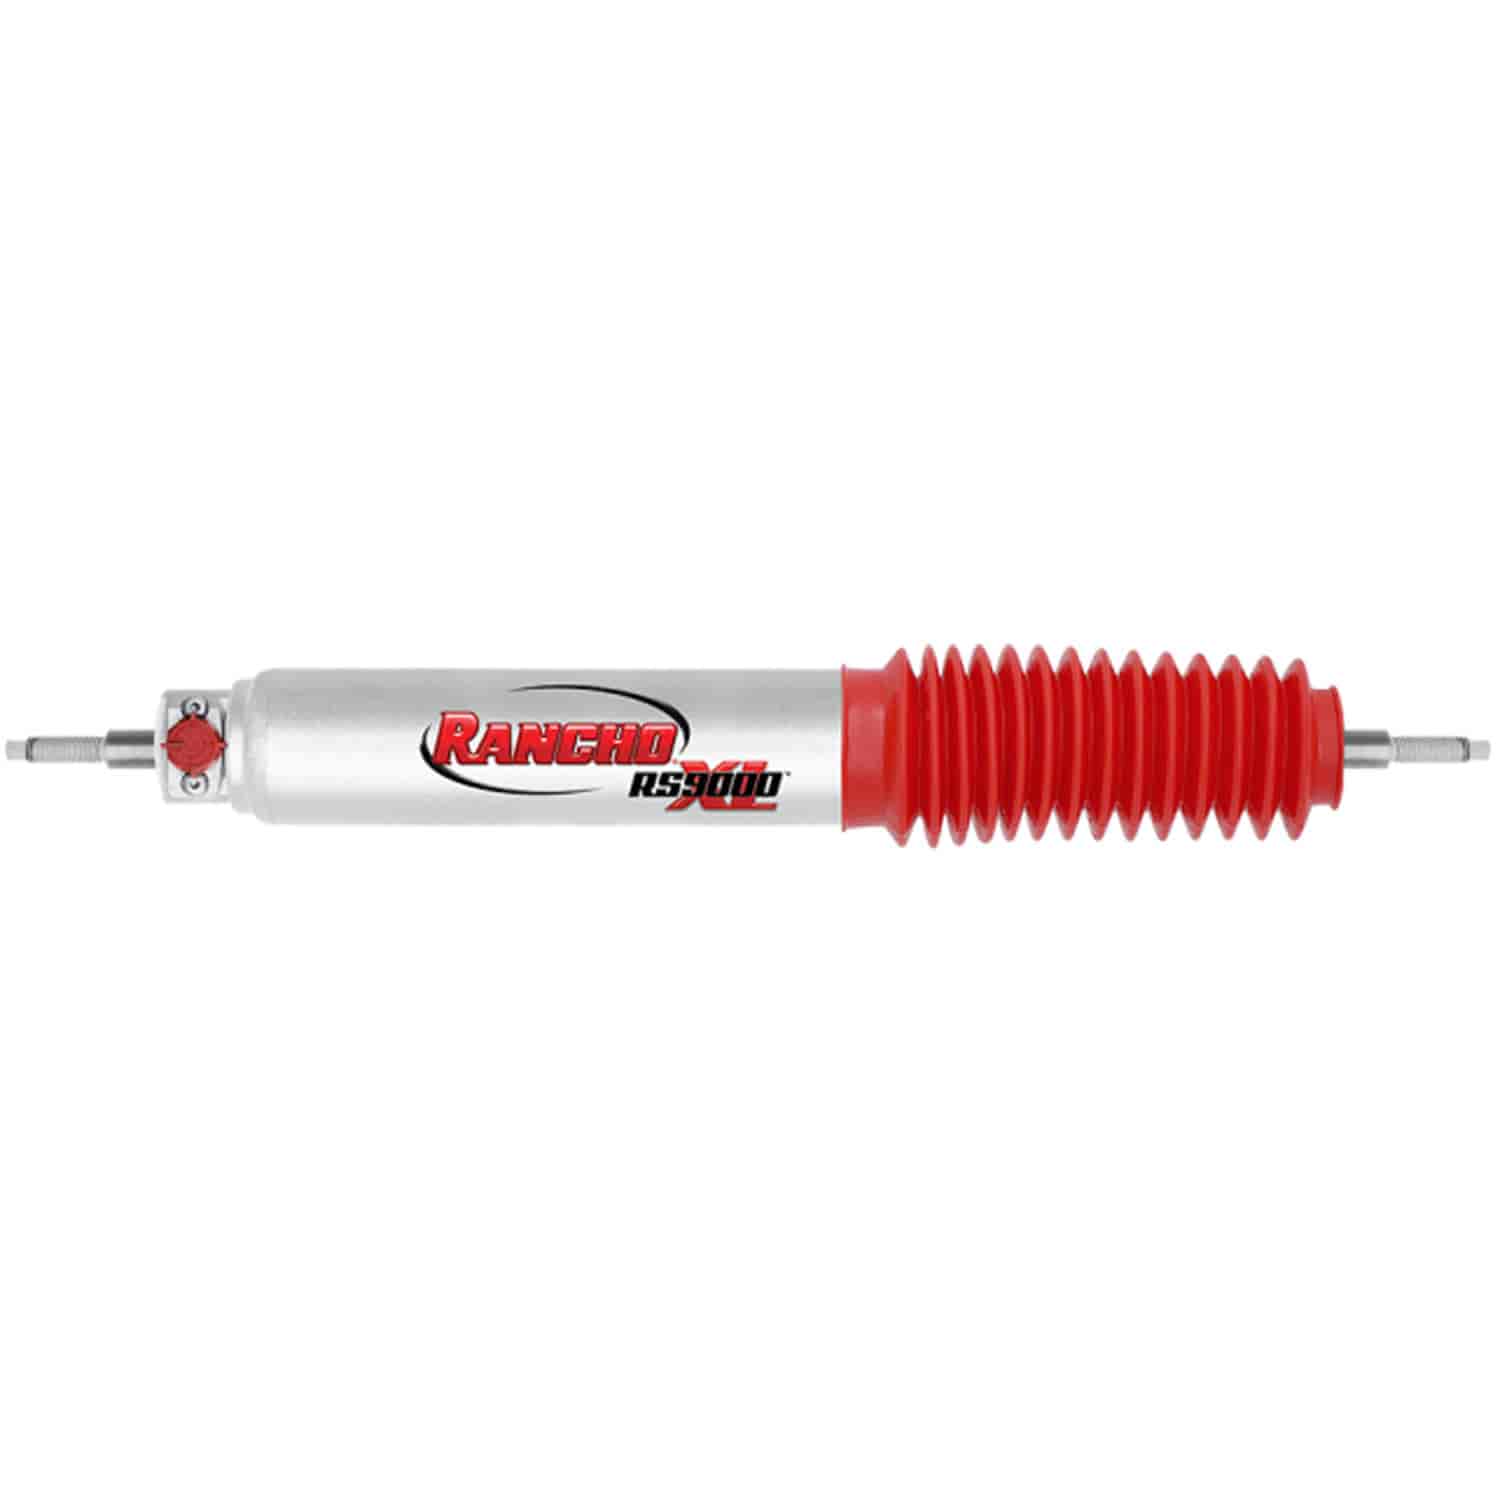 RS9000XL Front Shock Absorber Fits for Nissan Patrol